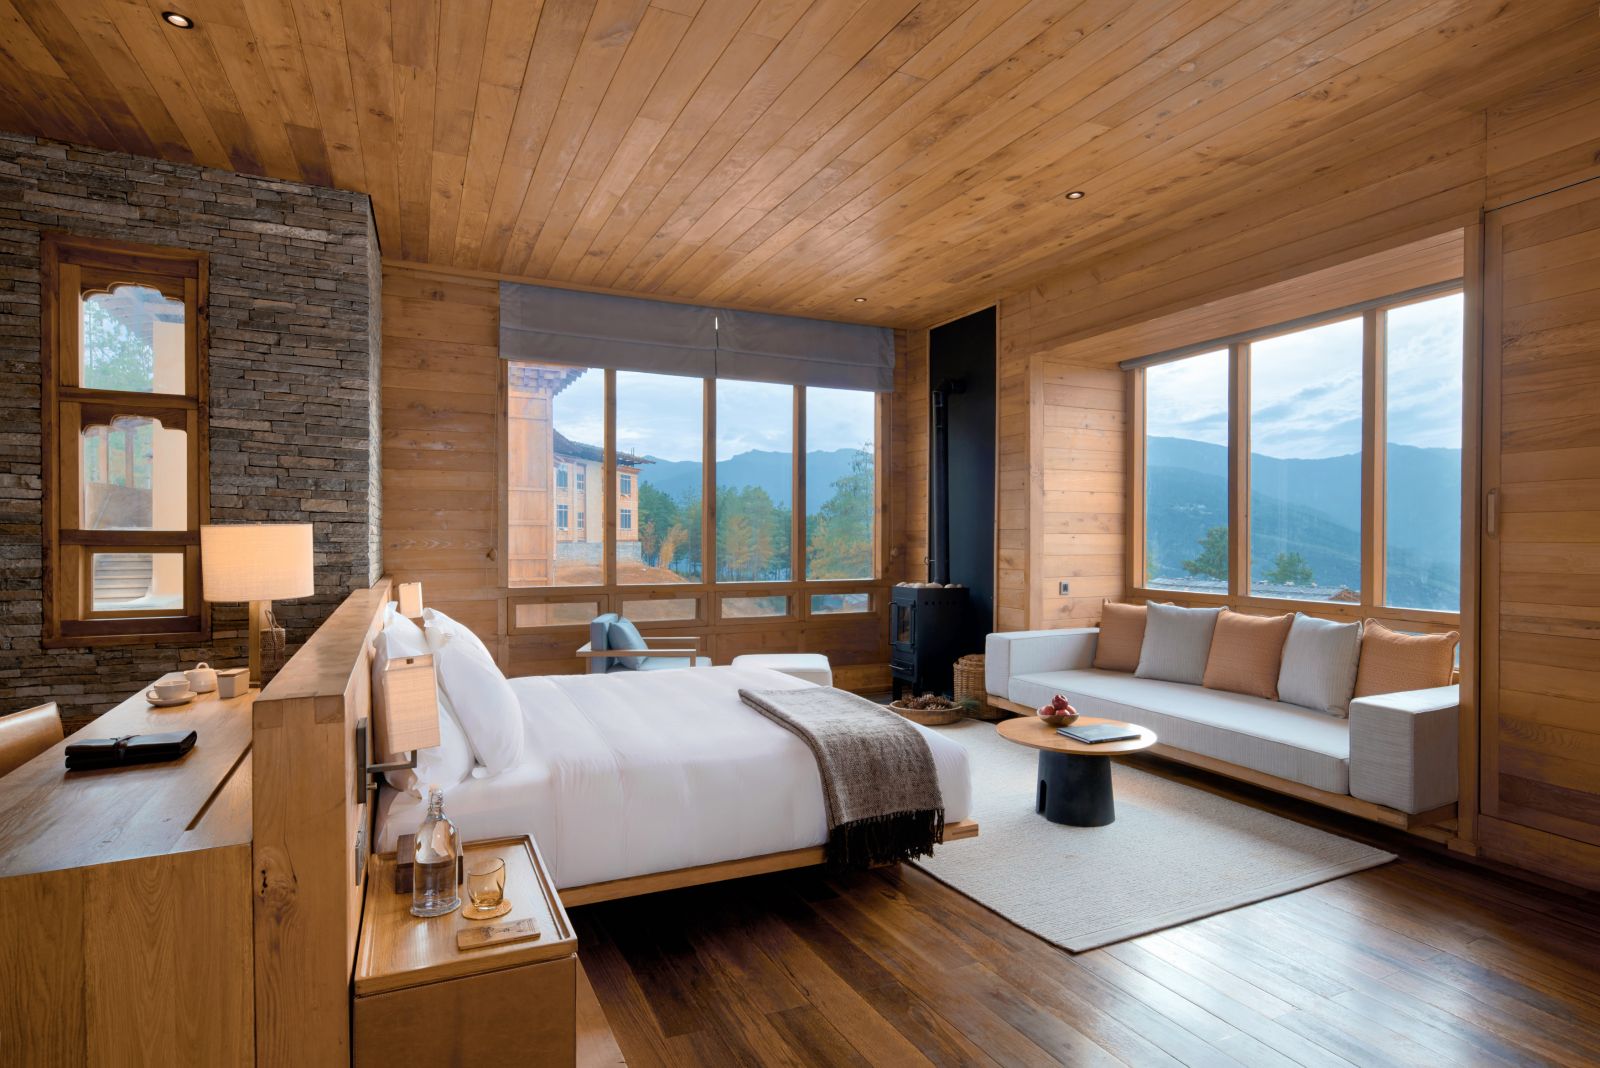 Main bedroom of the Lodge Suite with mountain views